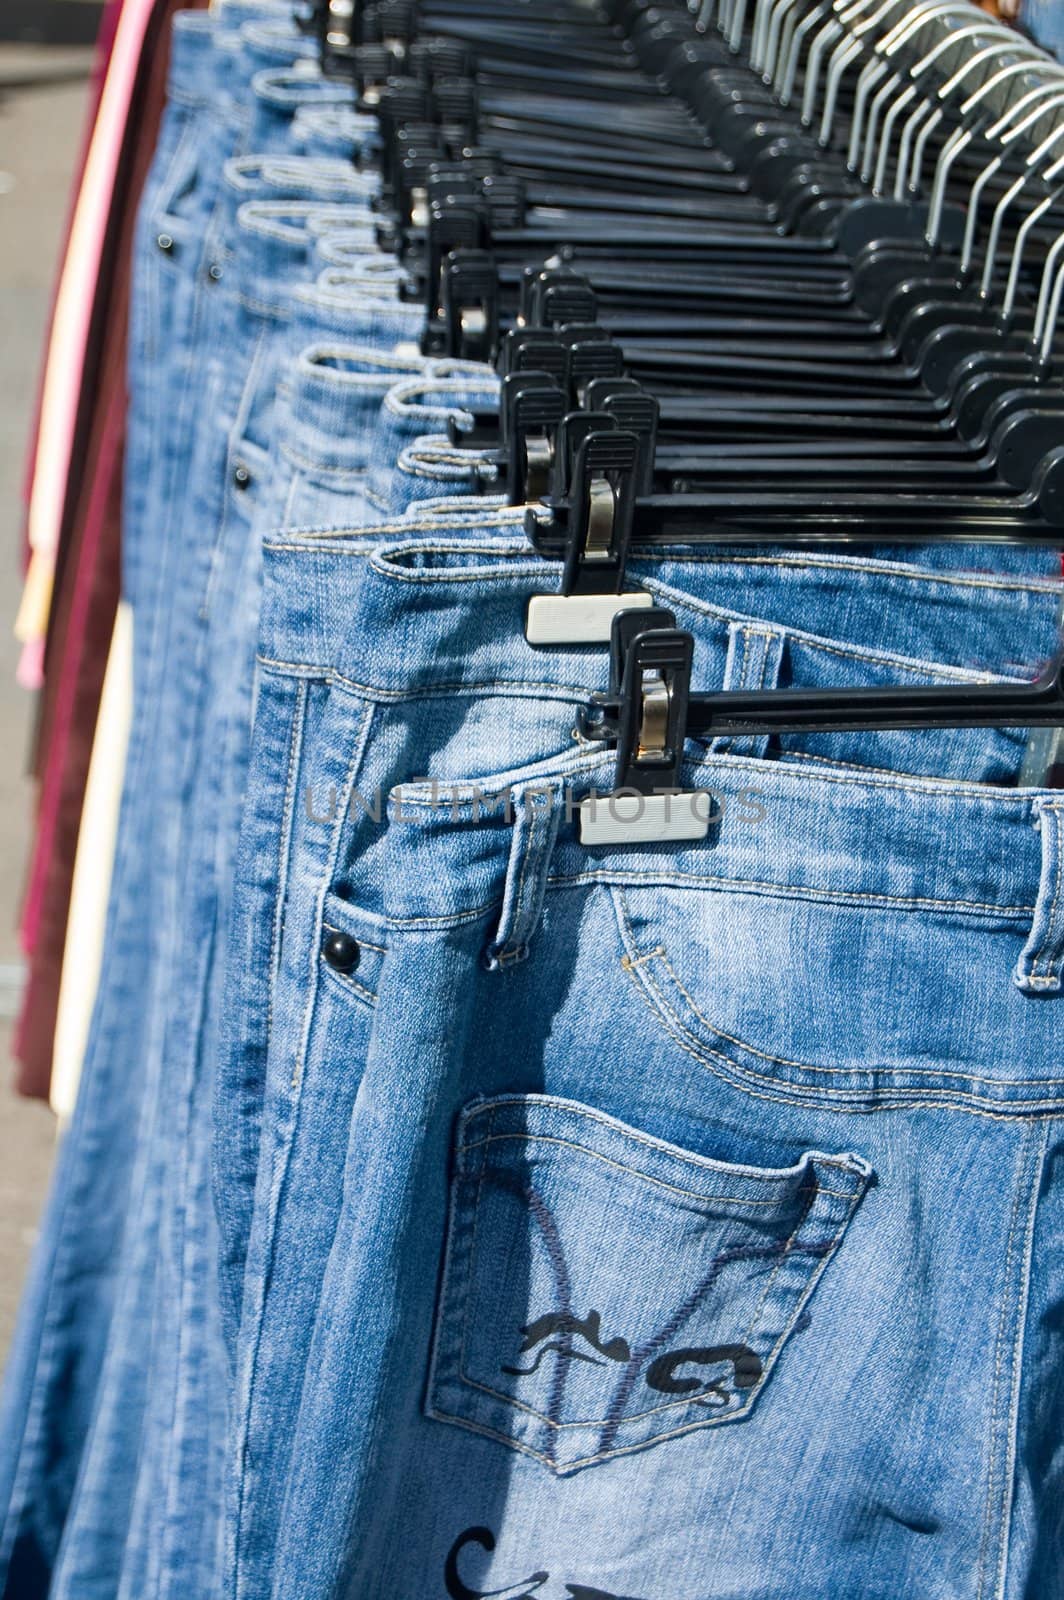 jeans for sale on a market